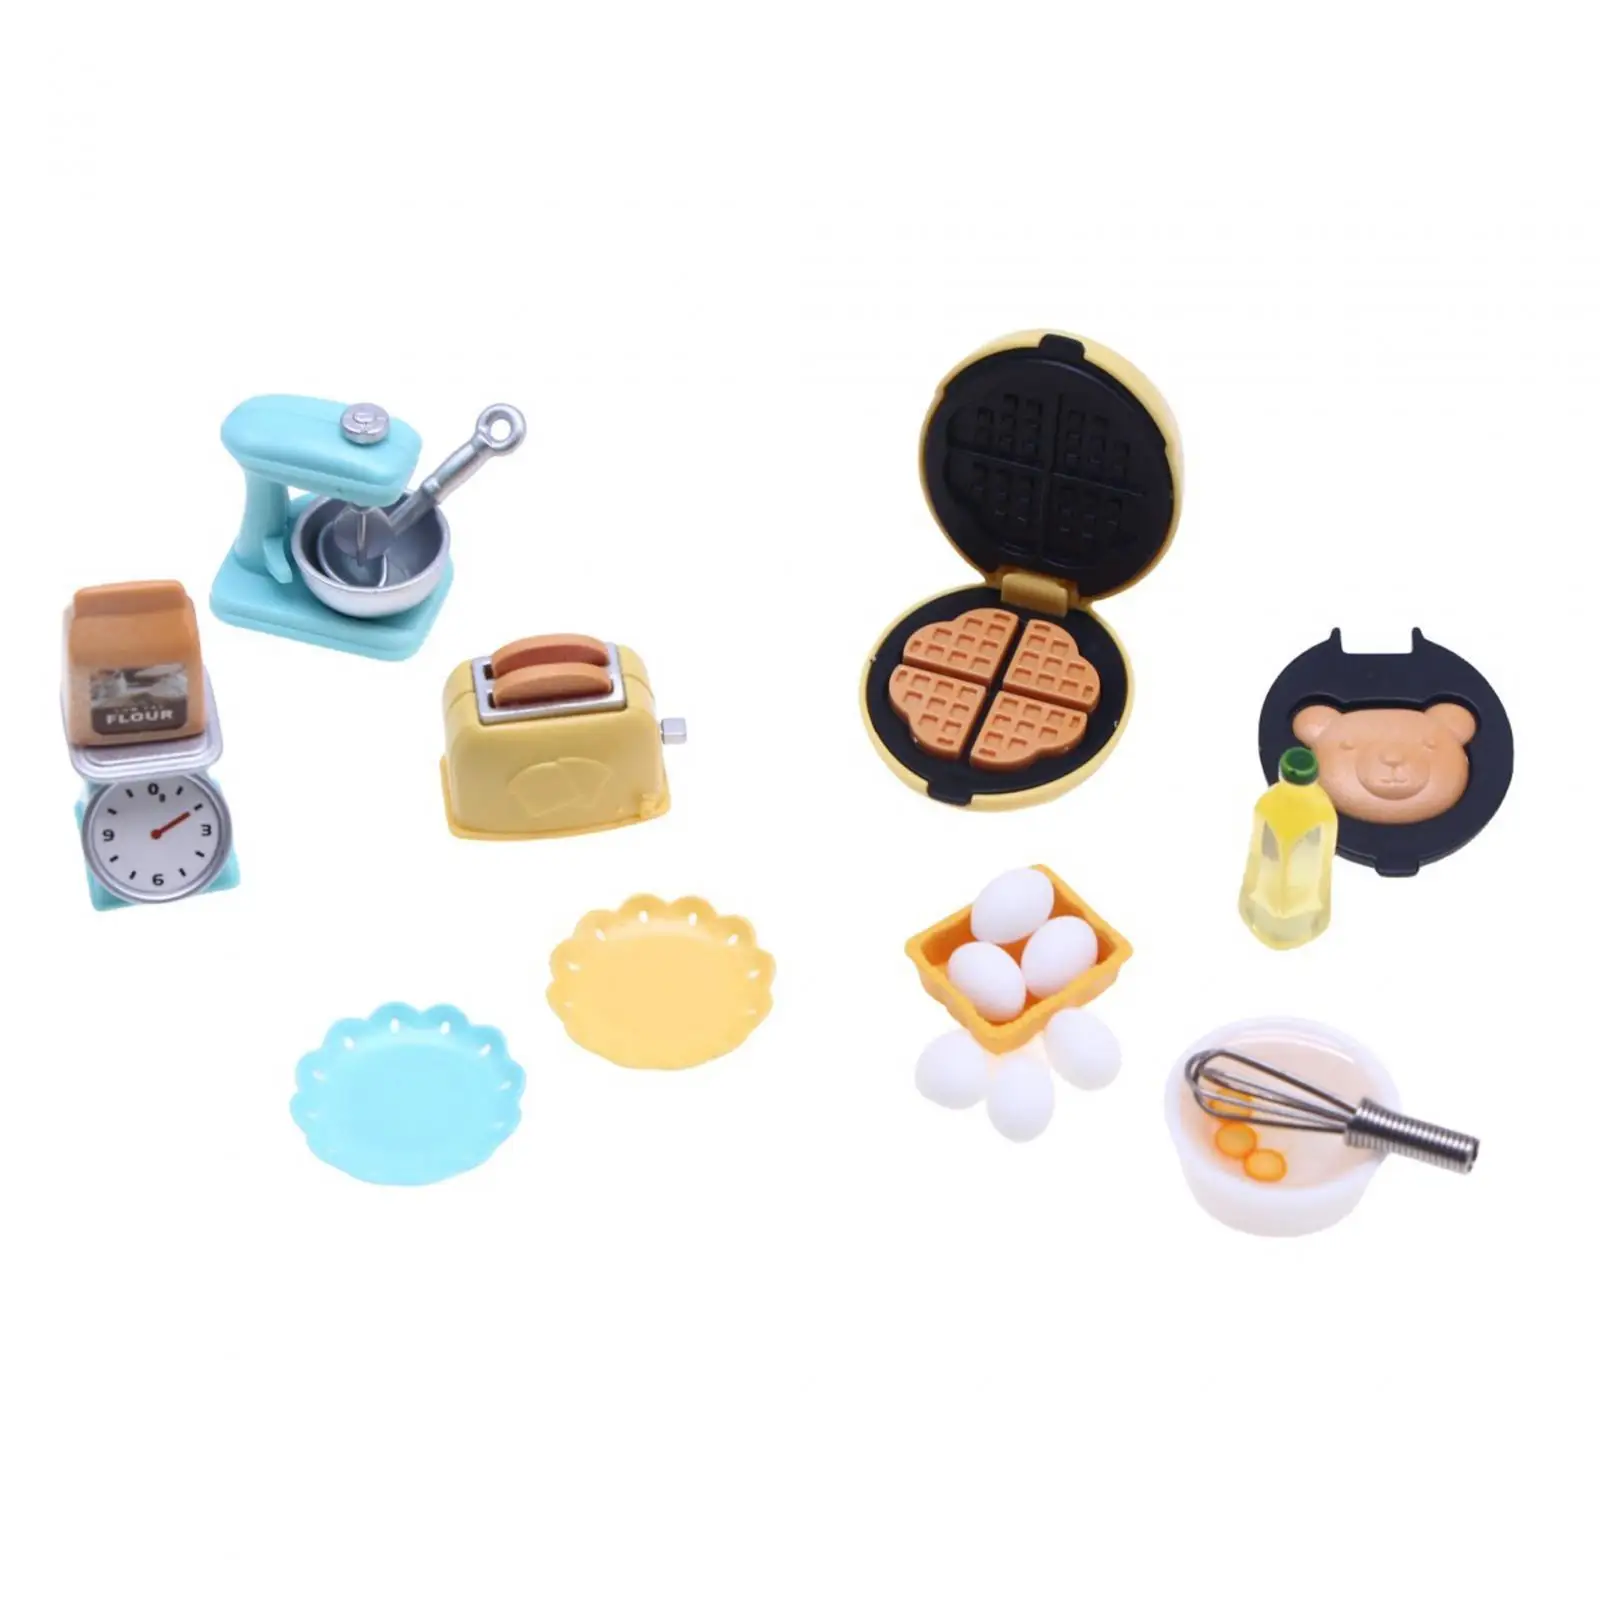 1/12 Miniature Dollhouse Kitchen Set Dollhouse Decoration Kids Pretend Play Miniature Furniture Toys for Girls Holiday Gifts